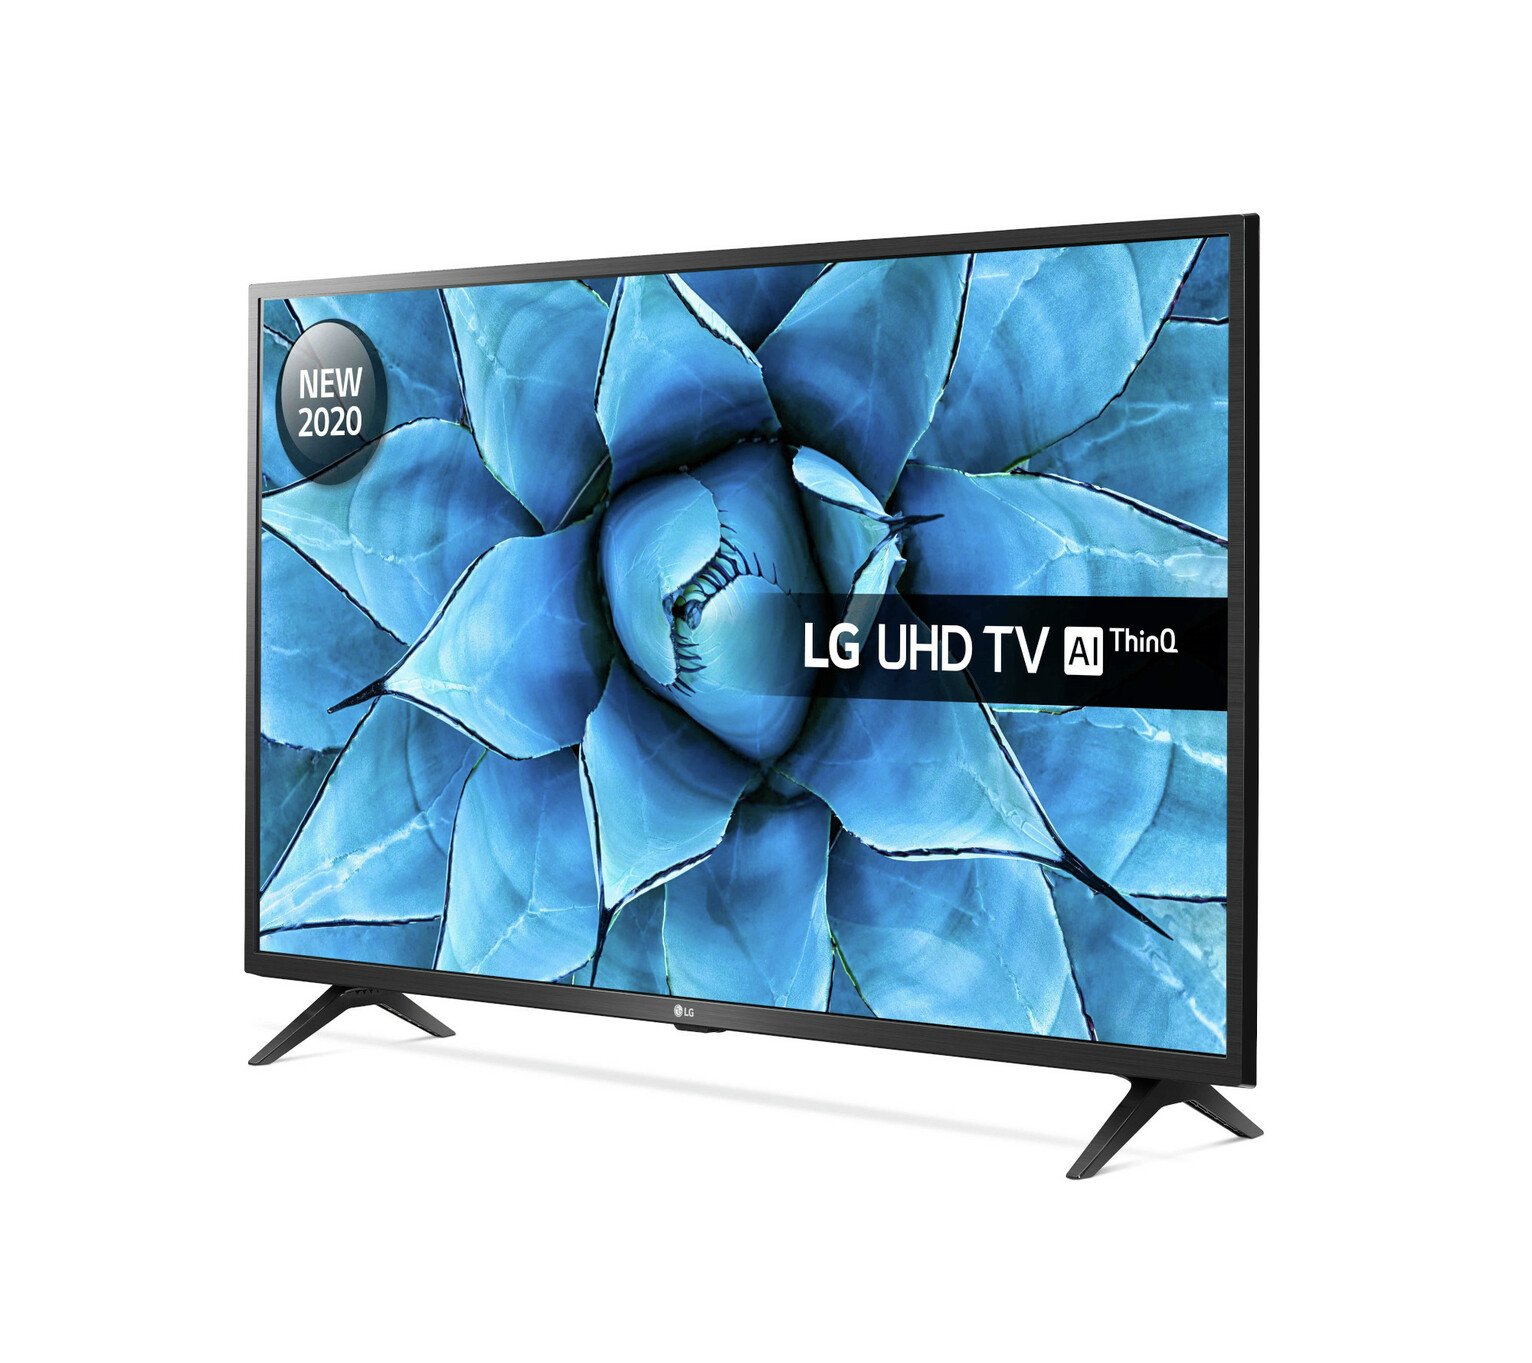 LG 65 Inch 65UN7300 Smart 4K Ultra HD LED TV with HDR Review